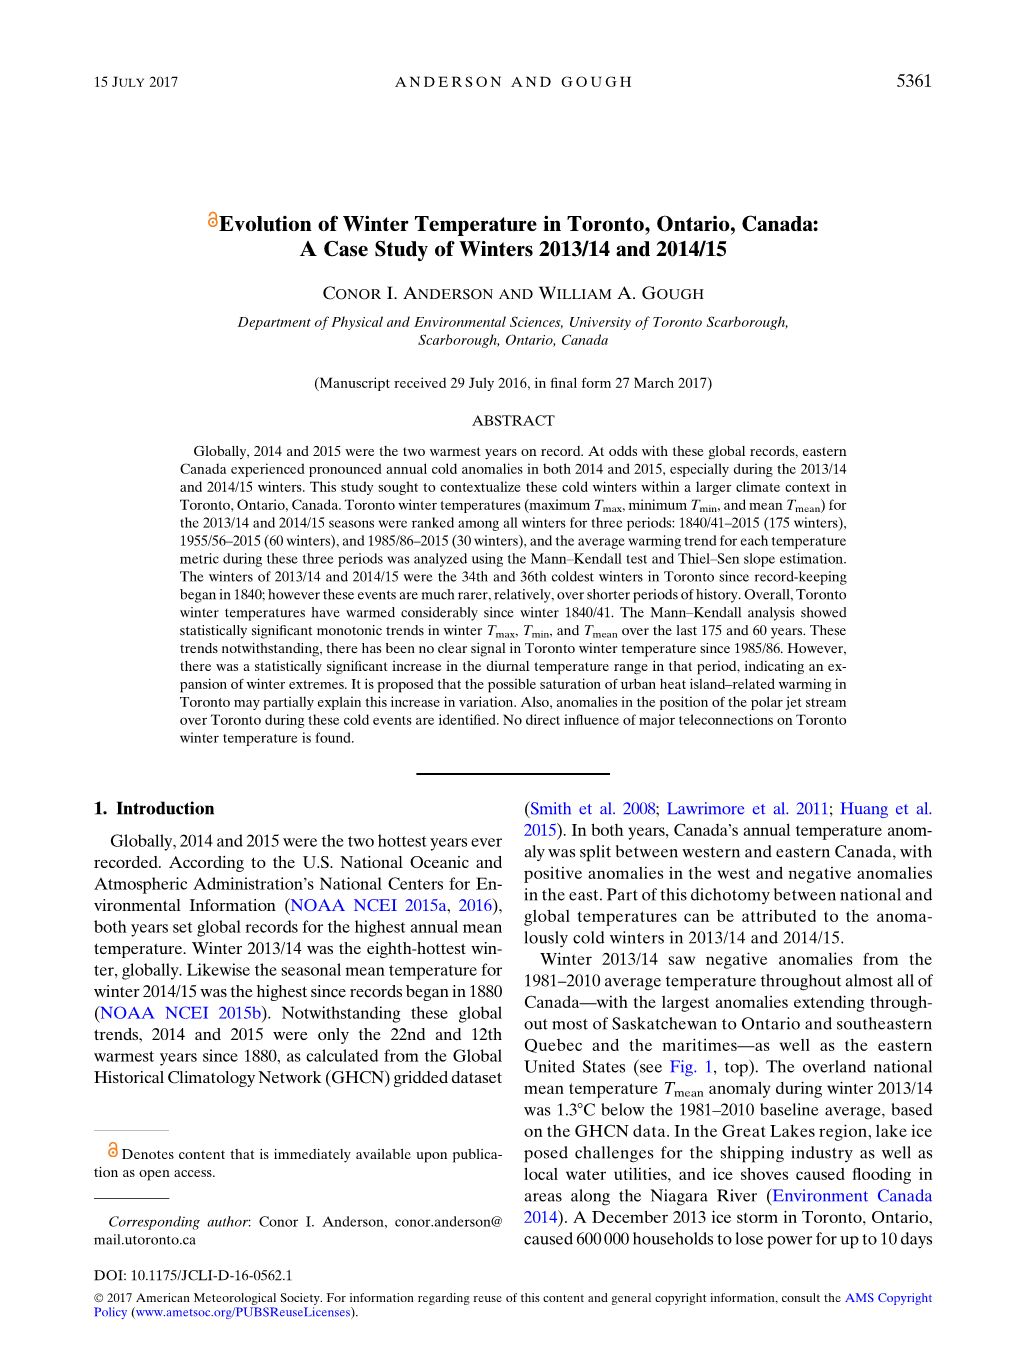 Evolution of Winter Temperature in Toronto, Ontario, Canada: a Case Study of Winters 2013/14 and 2014/15